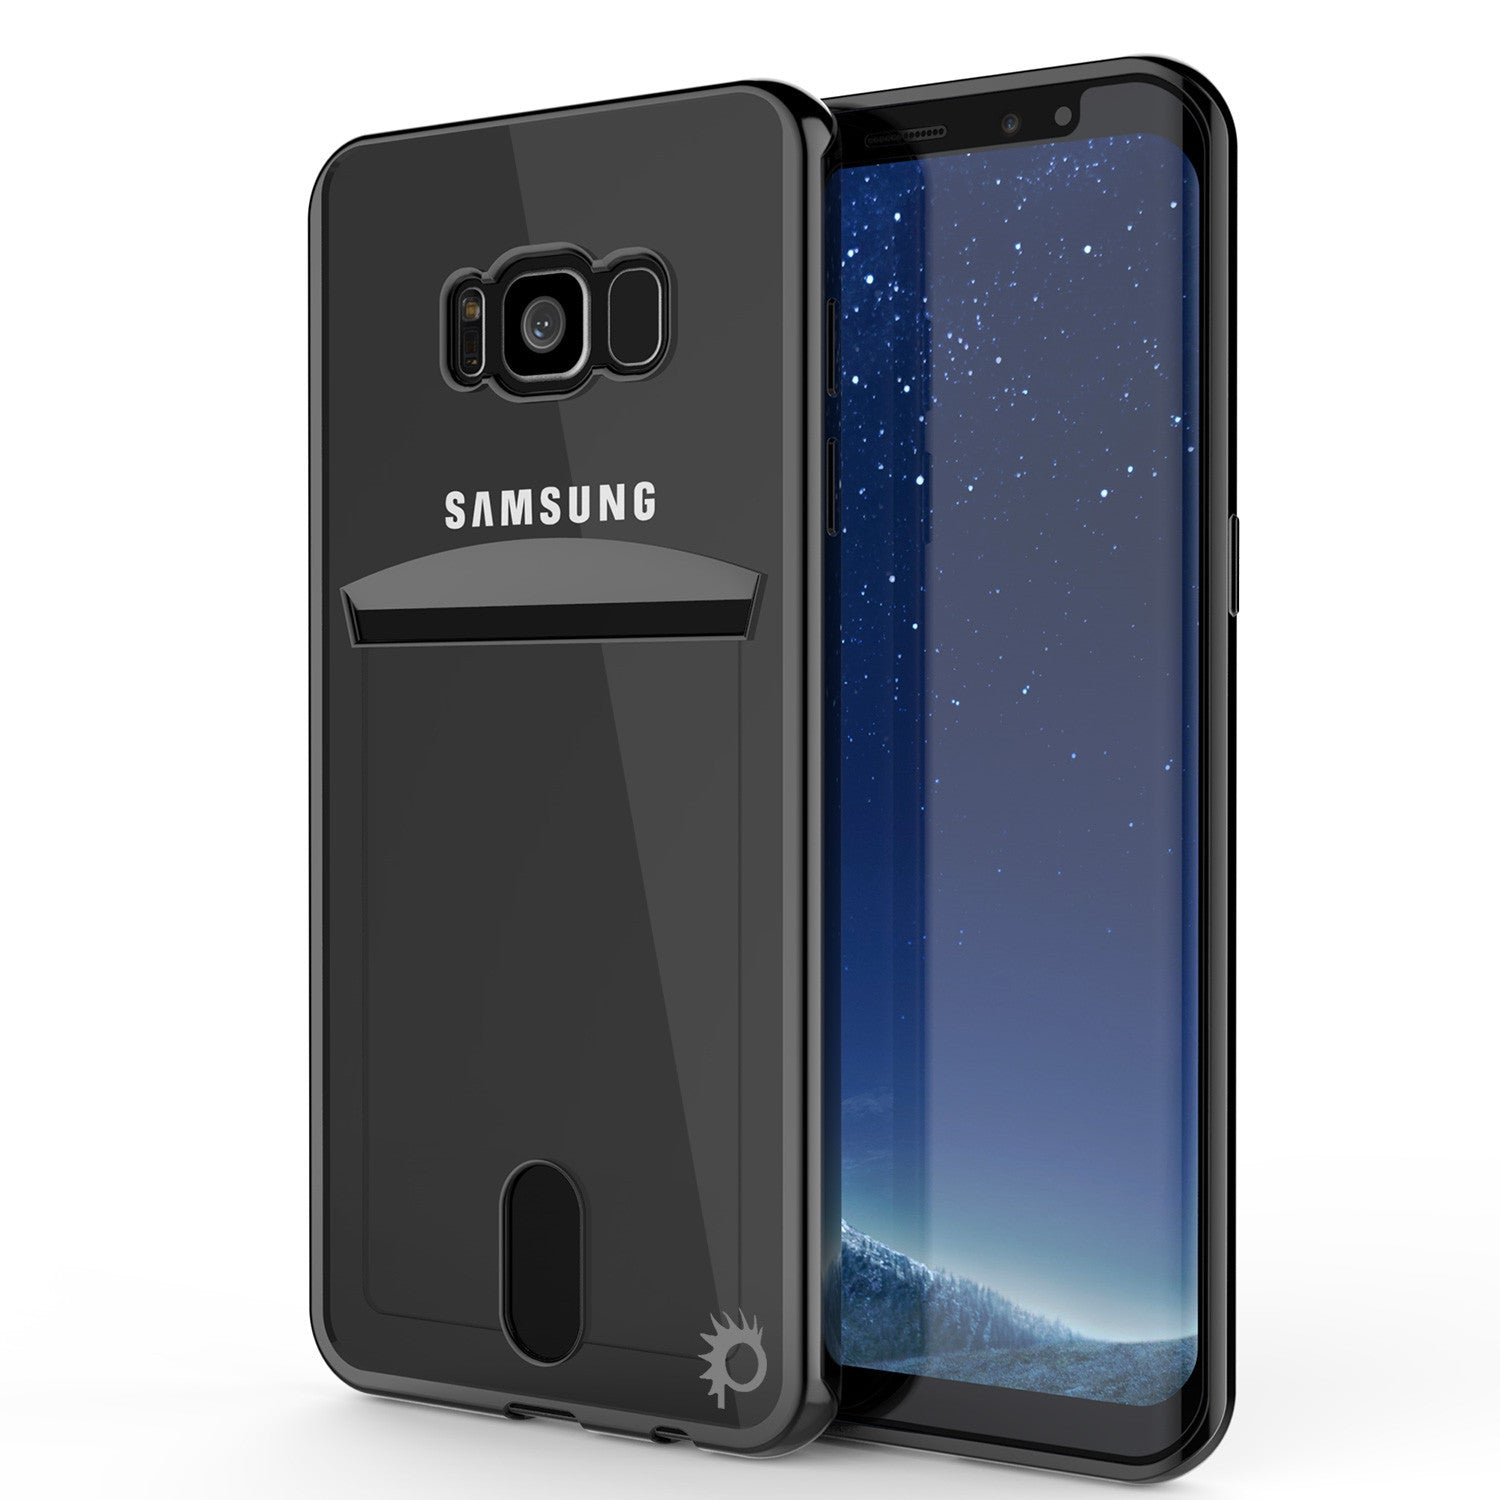 Galaxy S8 Case, PUNKCASE® LUCID Black Series | Card Slot | SHIELD Screen Protector | Ultra fit